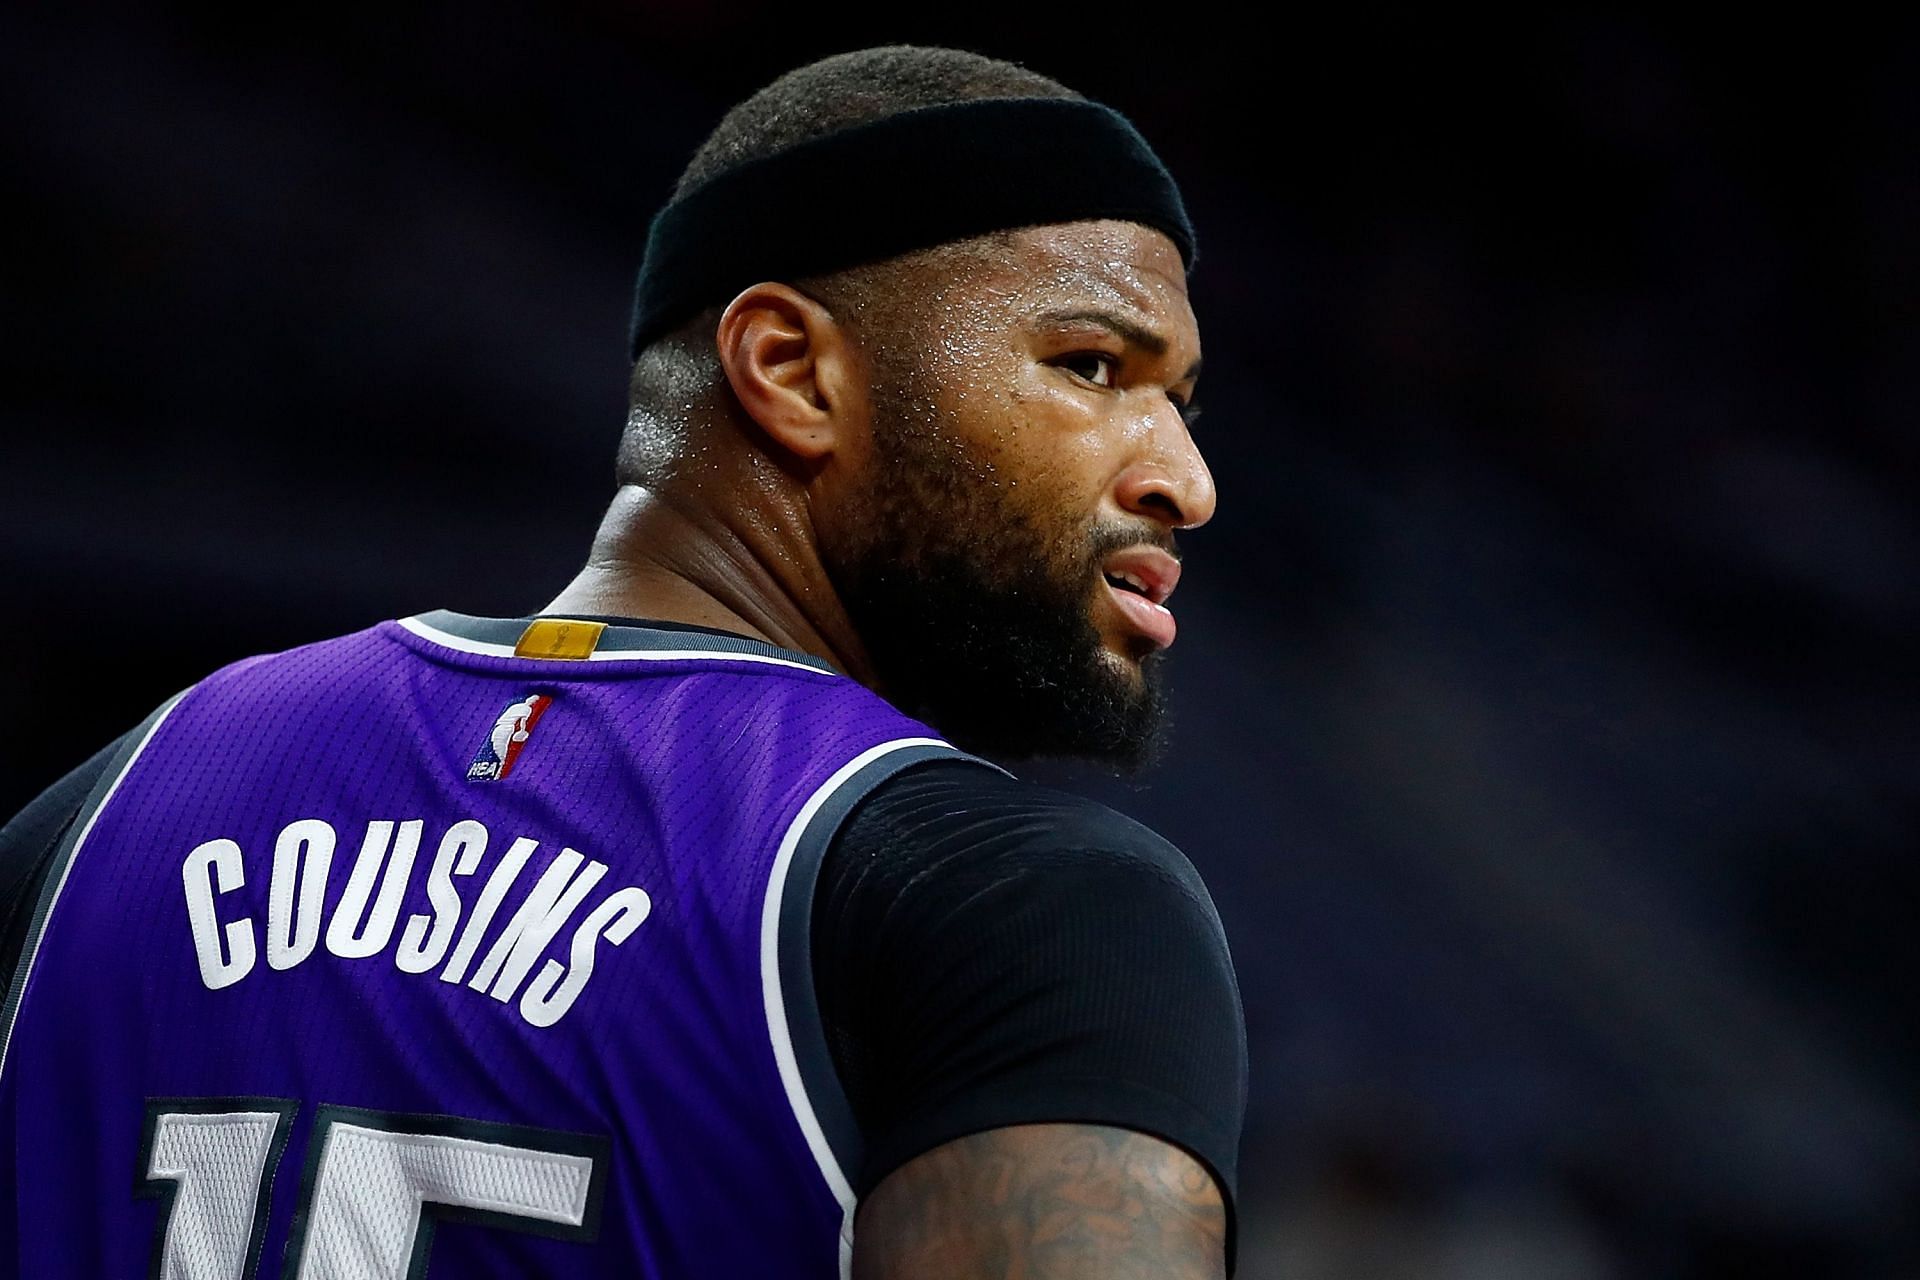 DeMarcus Cousins playing for the Sacramento Kings